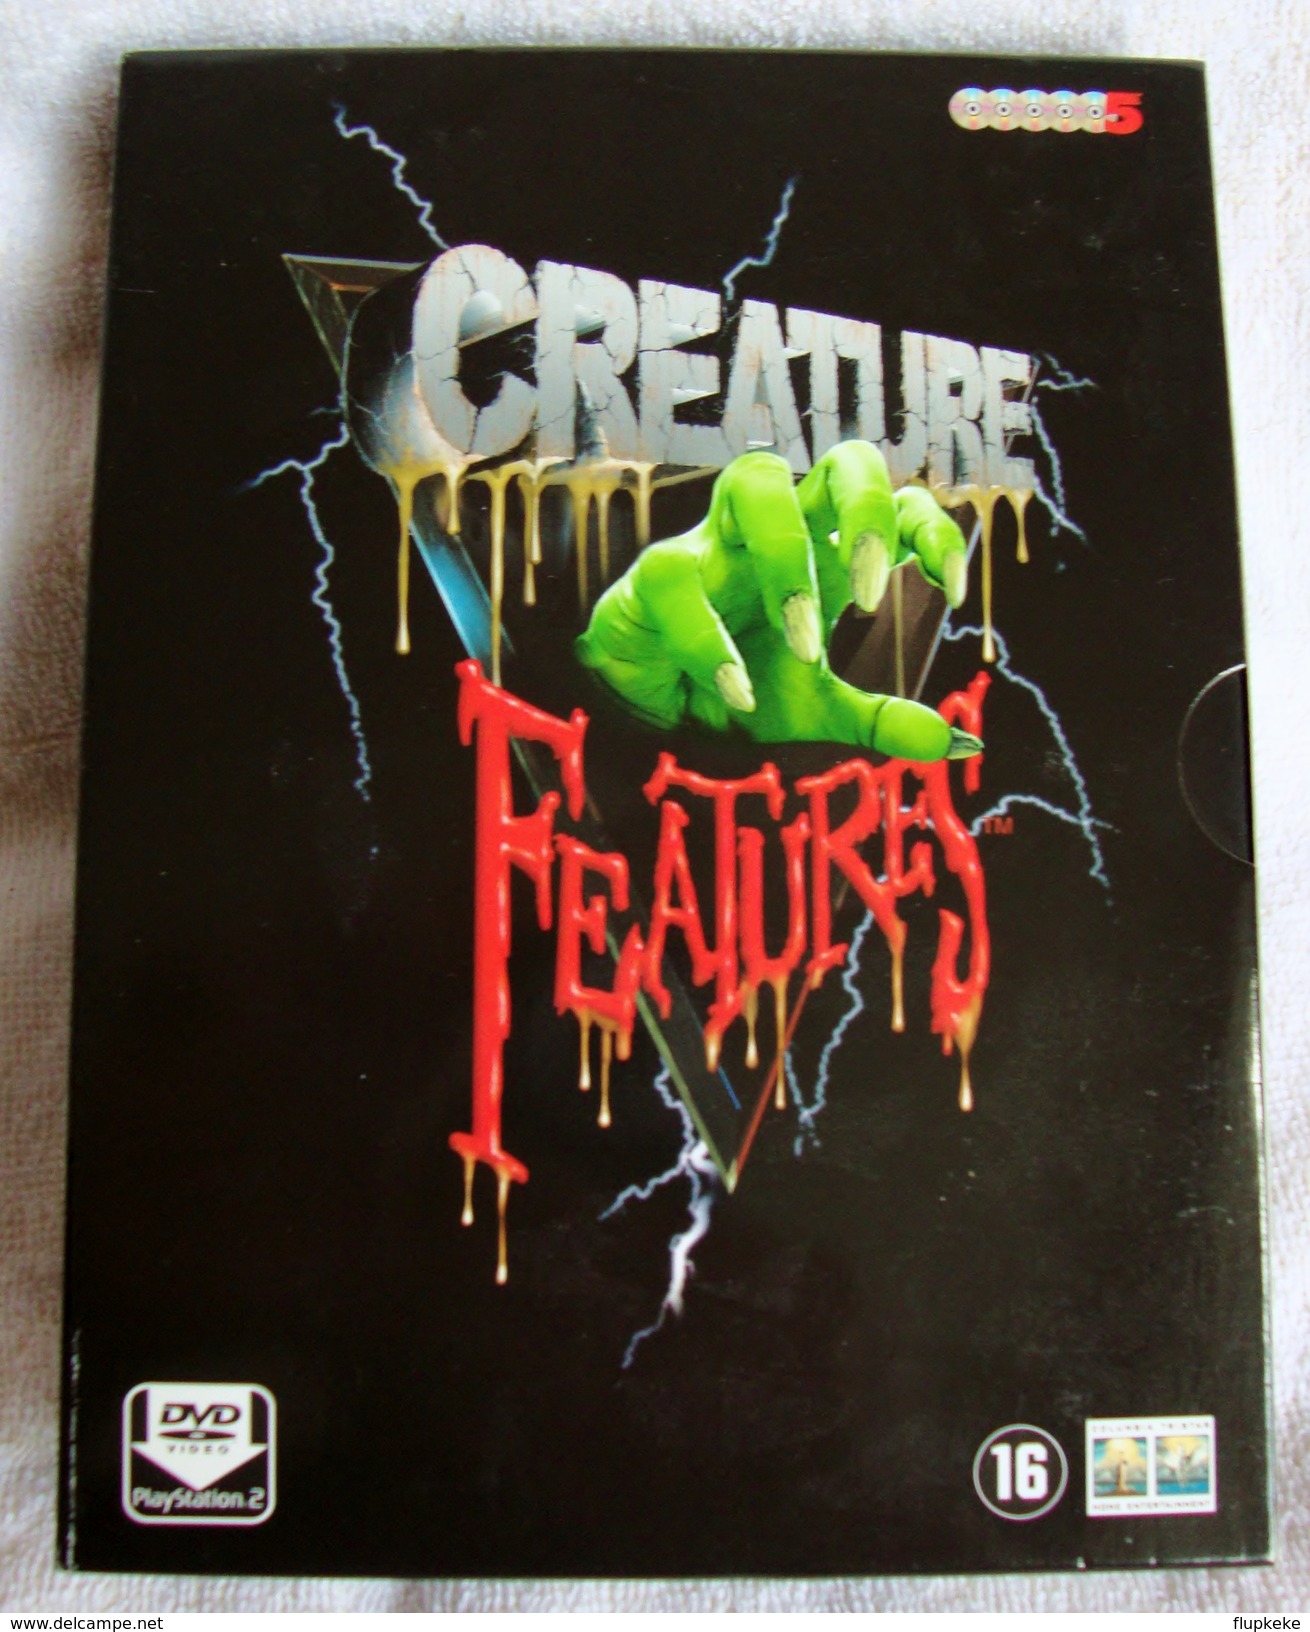 Dvd Zone 2 Creature Features She Creature The Day The World Ended Earth Vs. Spider Teenage Caveman How To Make A Monster - Ciencia Ficción Y Fantasía